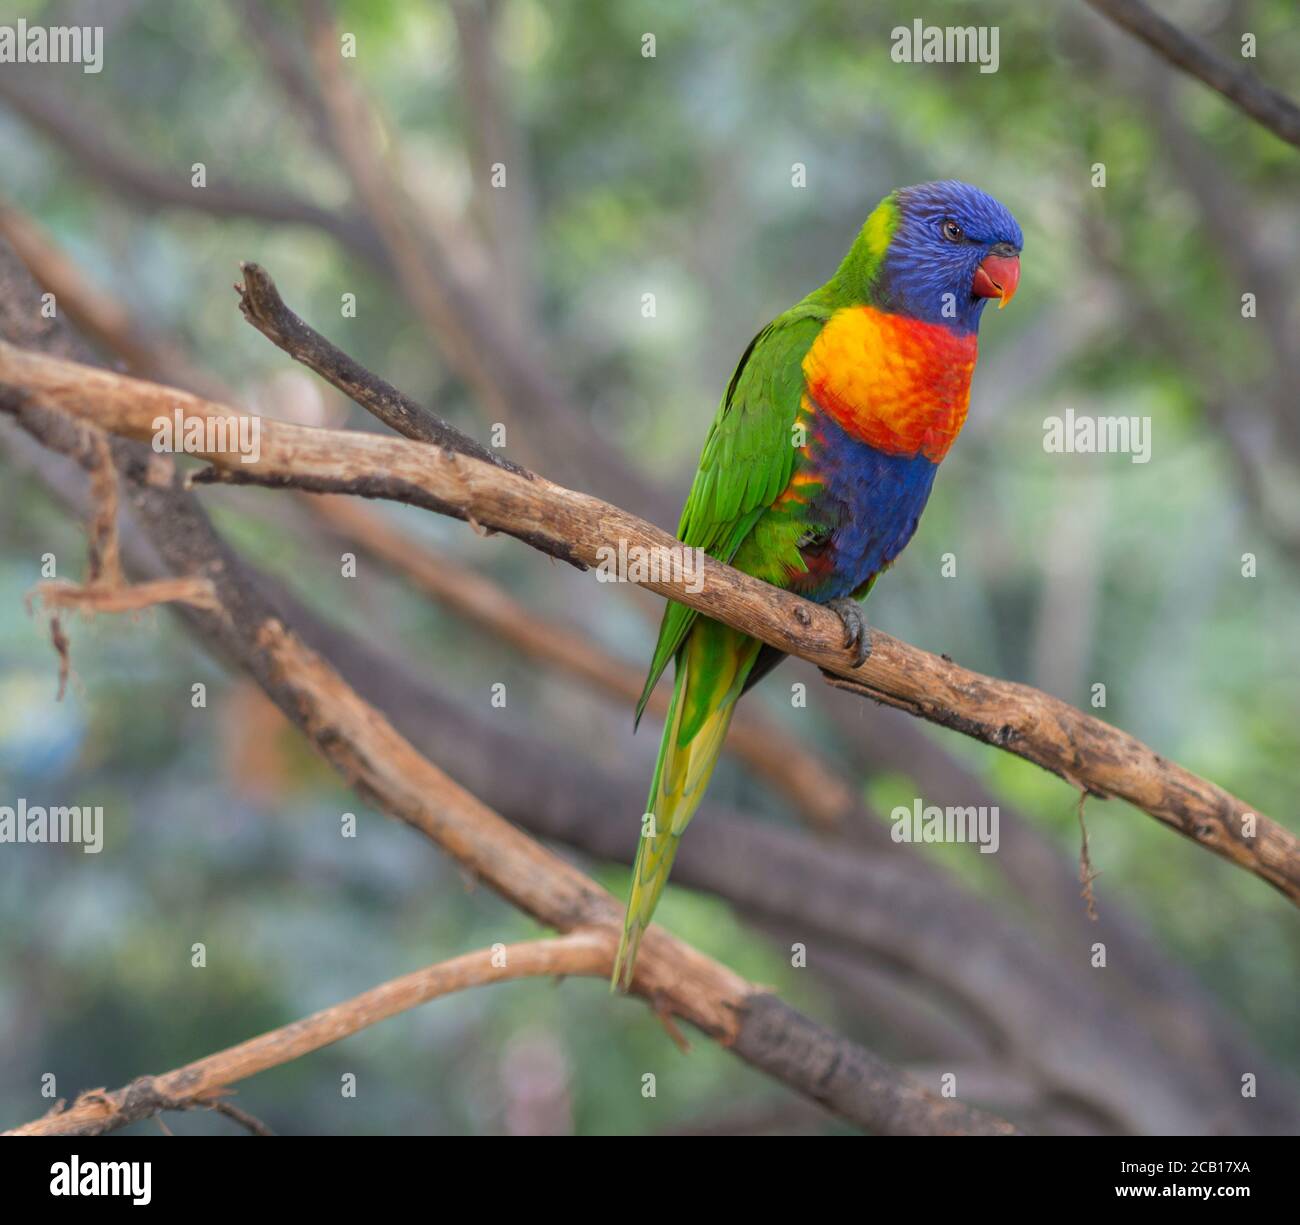 close up exotic colorful red blue green parrot Agapornis reainbow lorikeet sitting on the tree branch Stock Photo